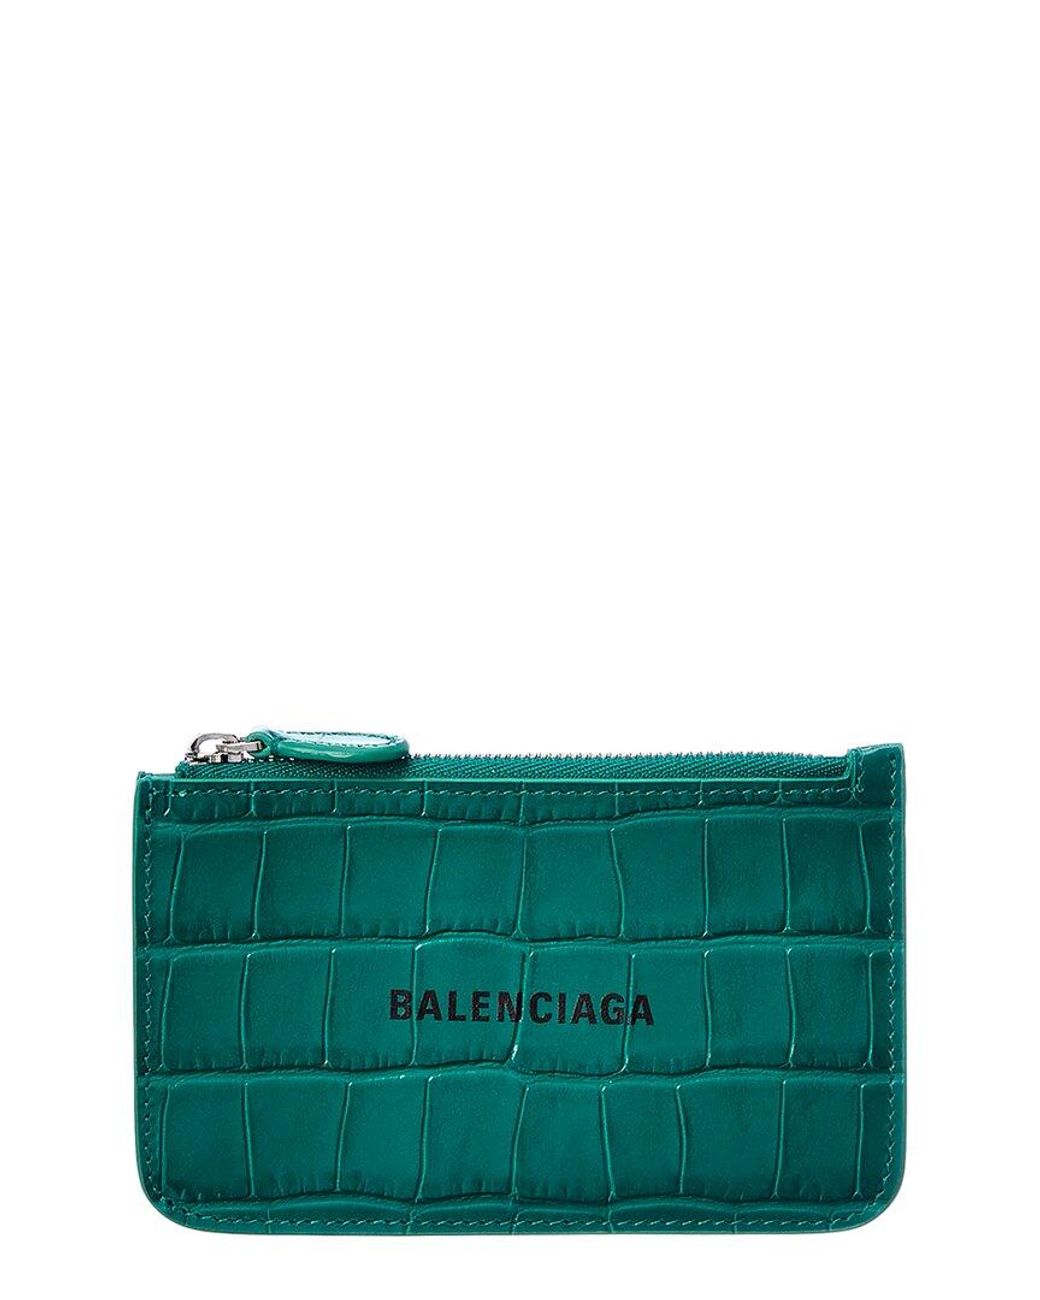 Balenciaga Cash Large Croc-embossed Leather Coin Purse in Green | Lyst ...